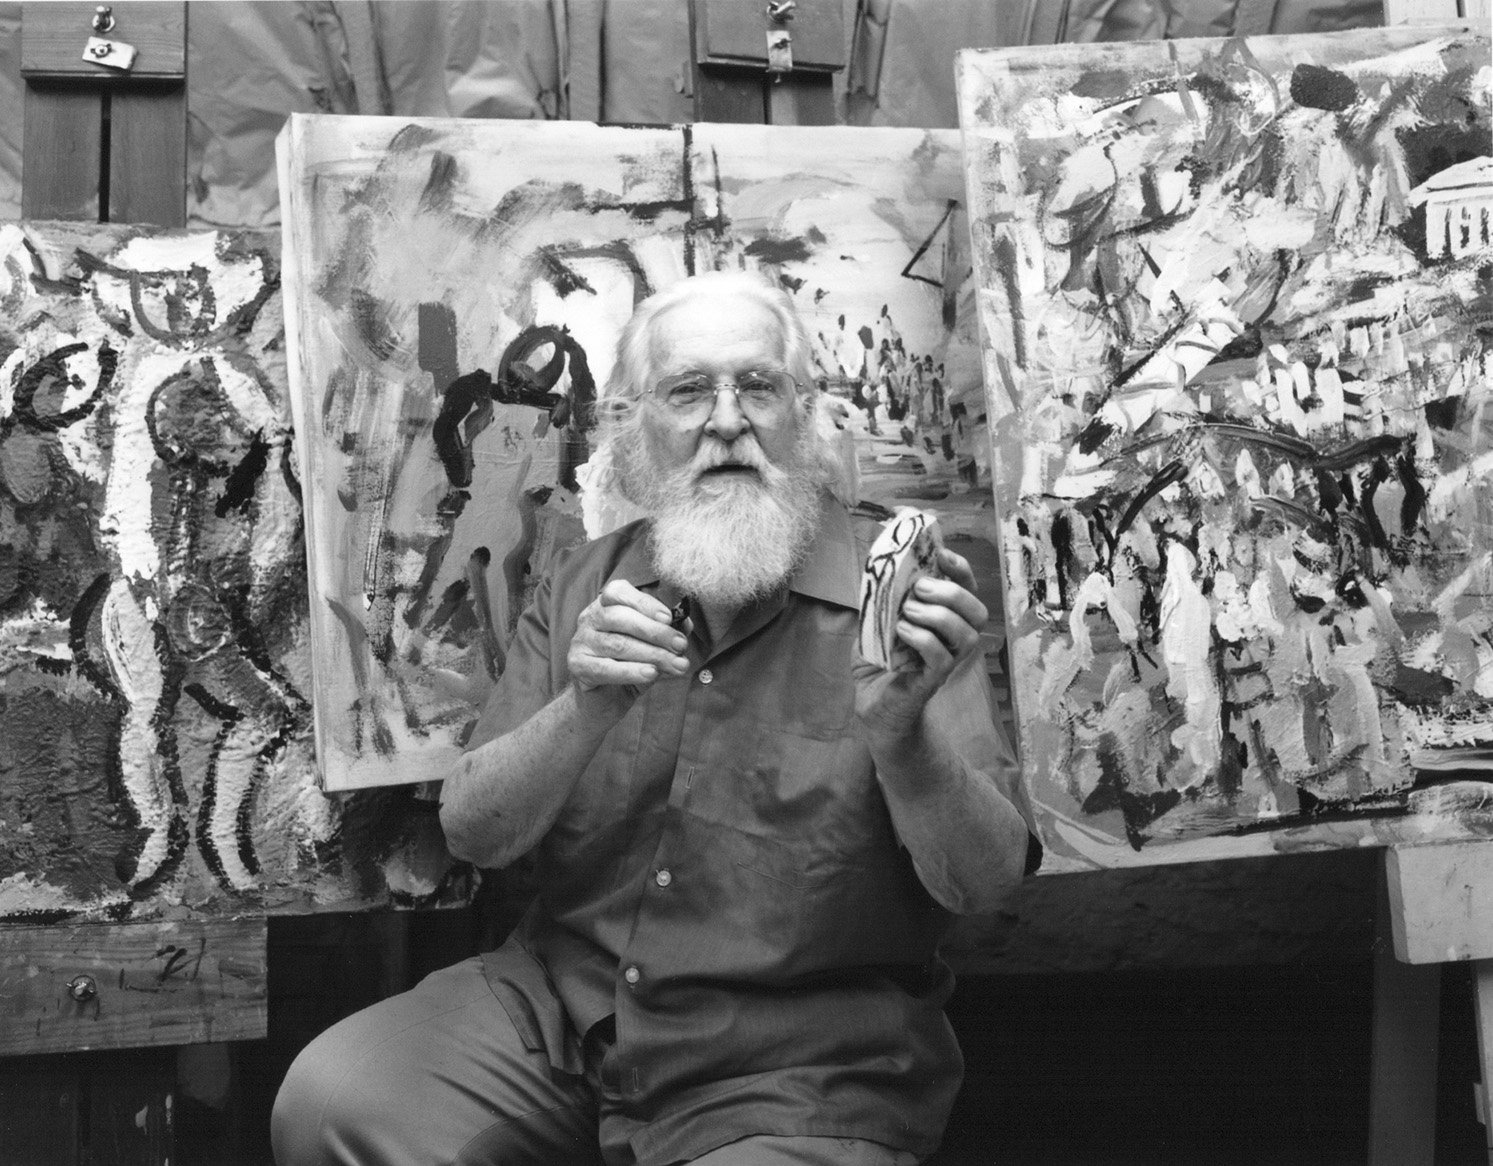   Paul Chidlaw in His Studio, 1985. Courtesy of Cal Kowal.  